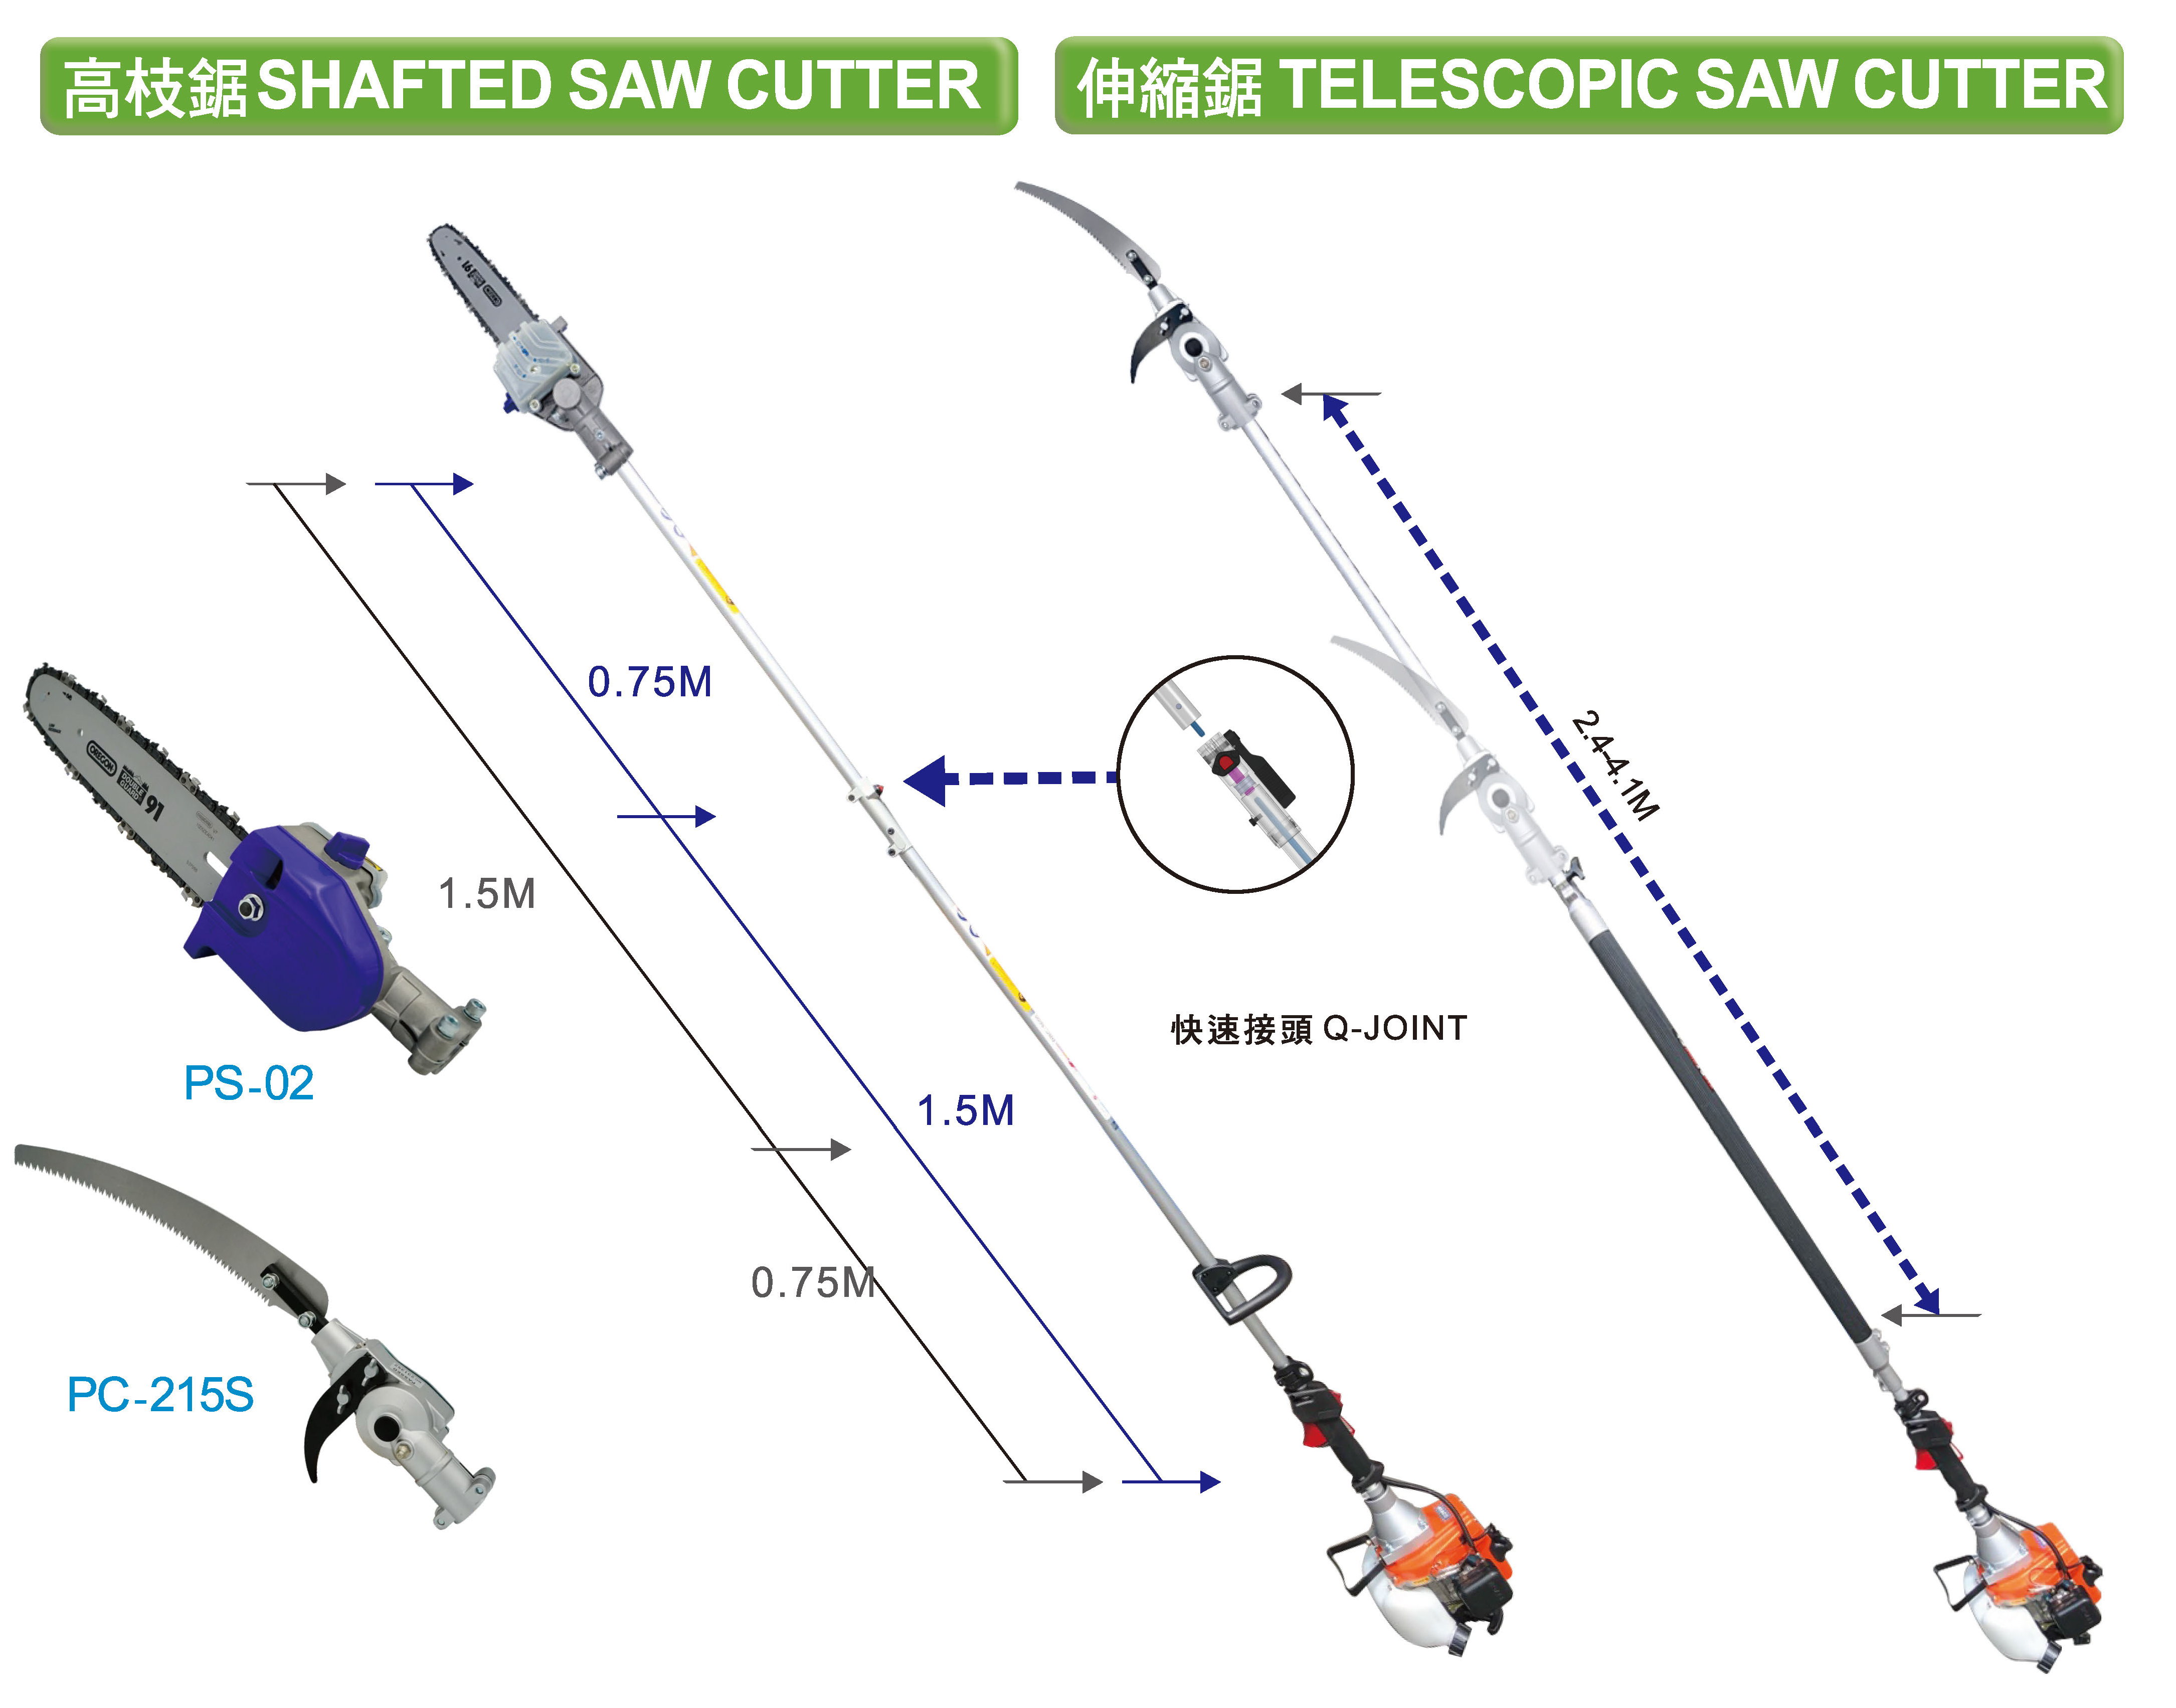 Shafted Saw Cutter & Telescopic Saw Cutter